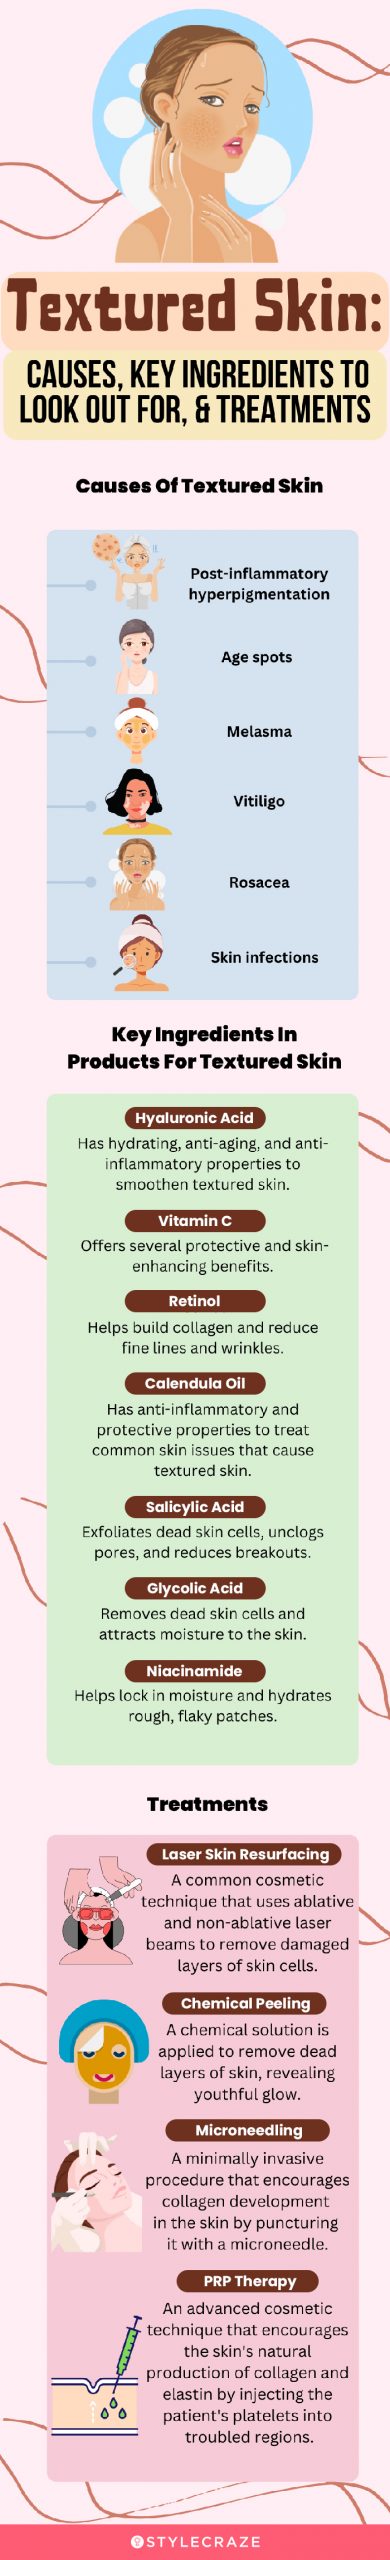 Textured Skin & Its Causes [infographic]